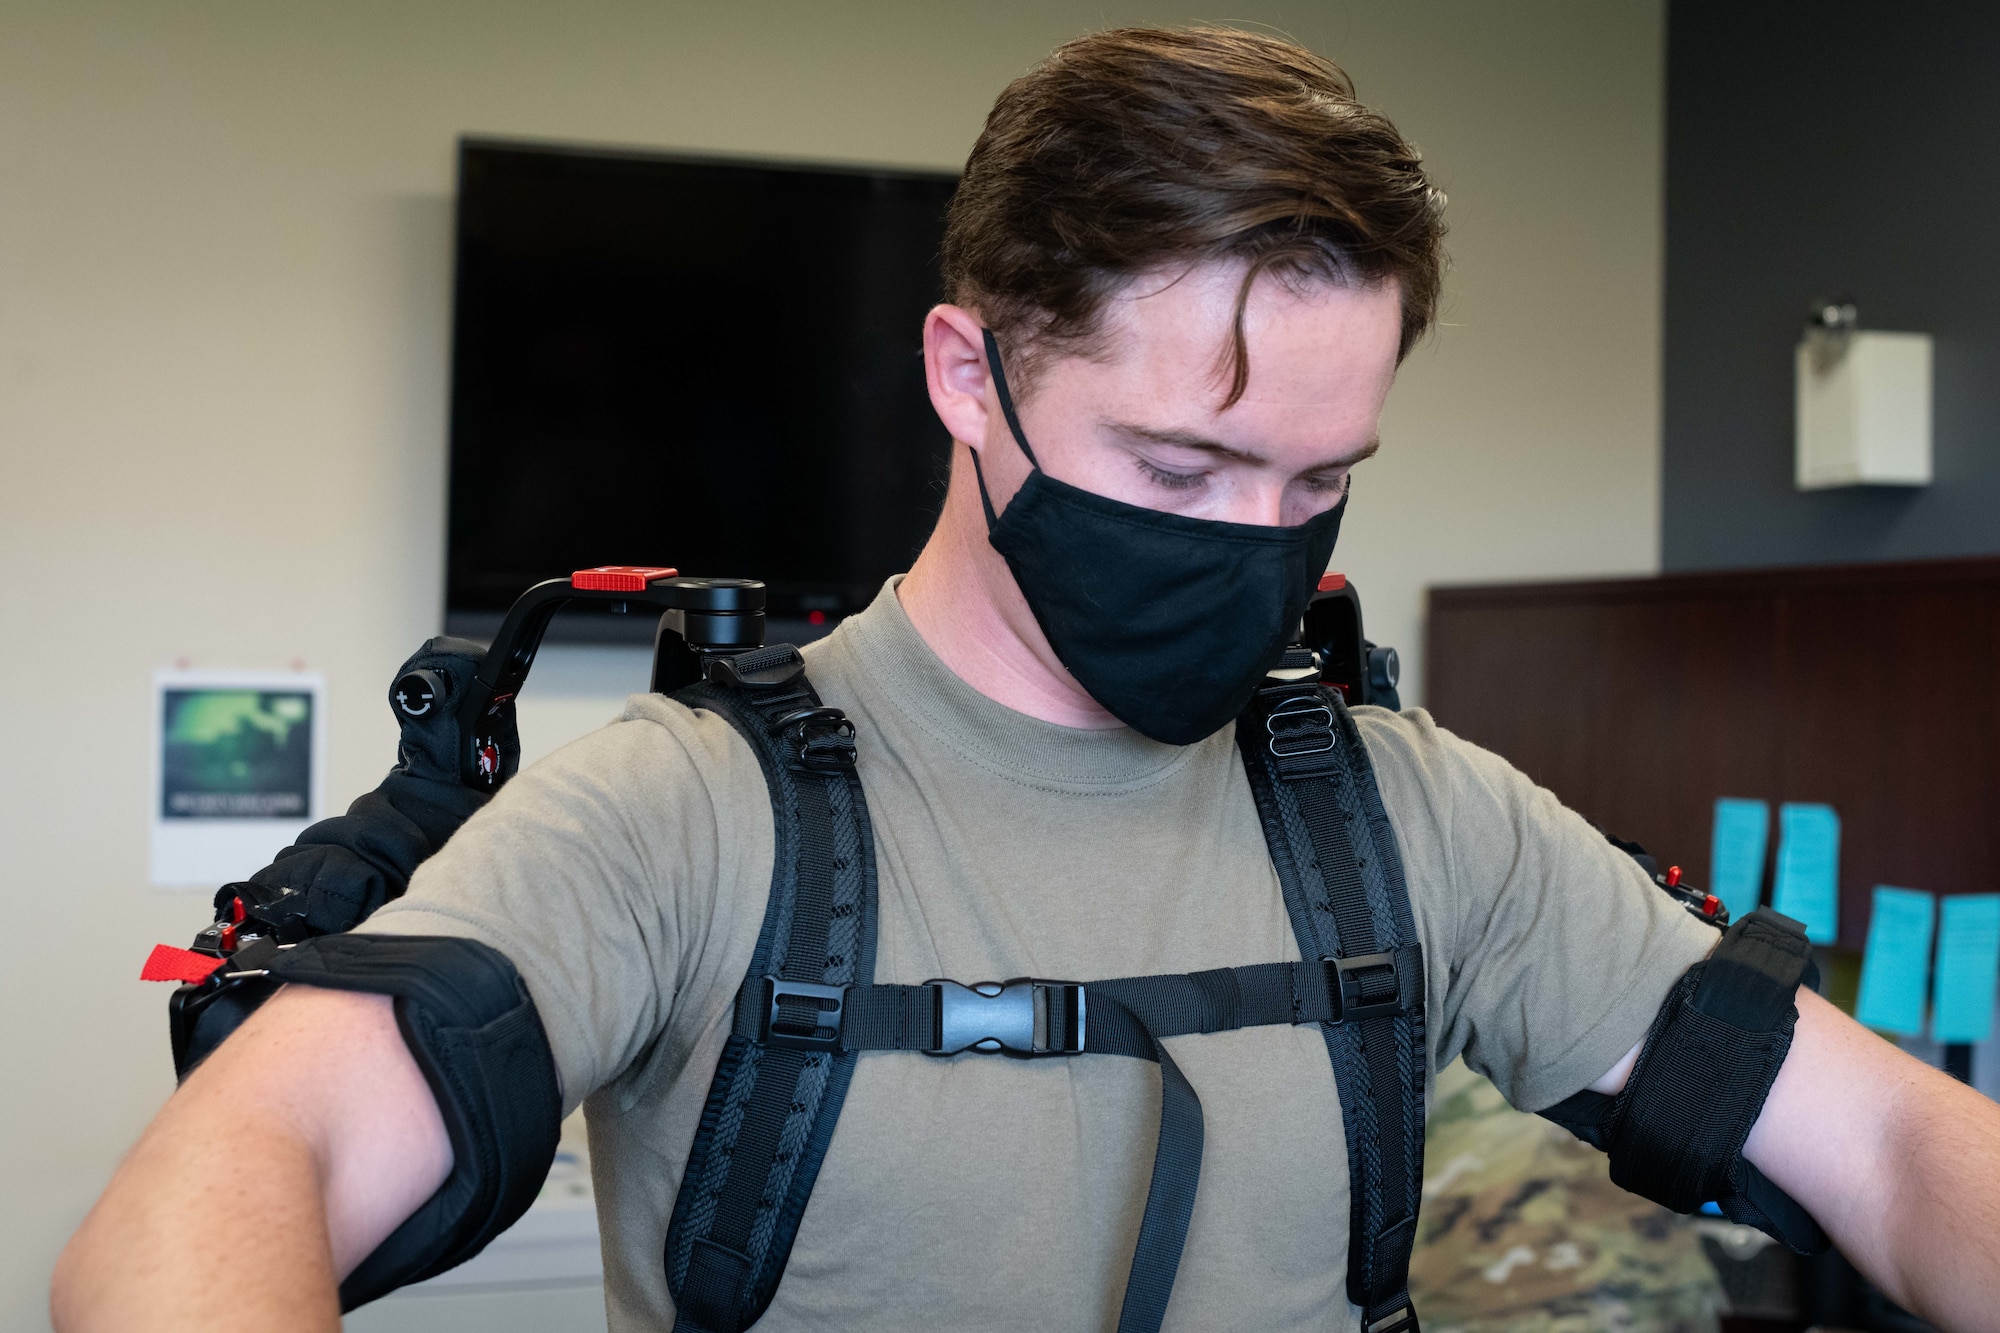 Airman stands with suit strapped around shoulders and arms.